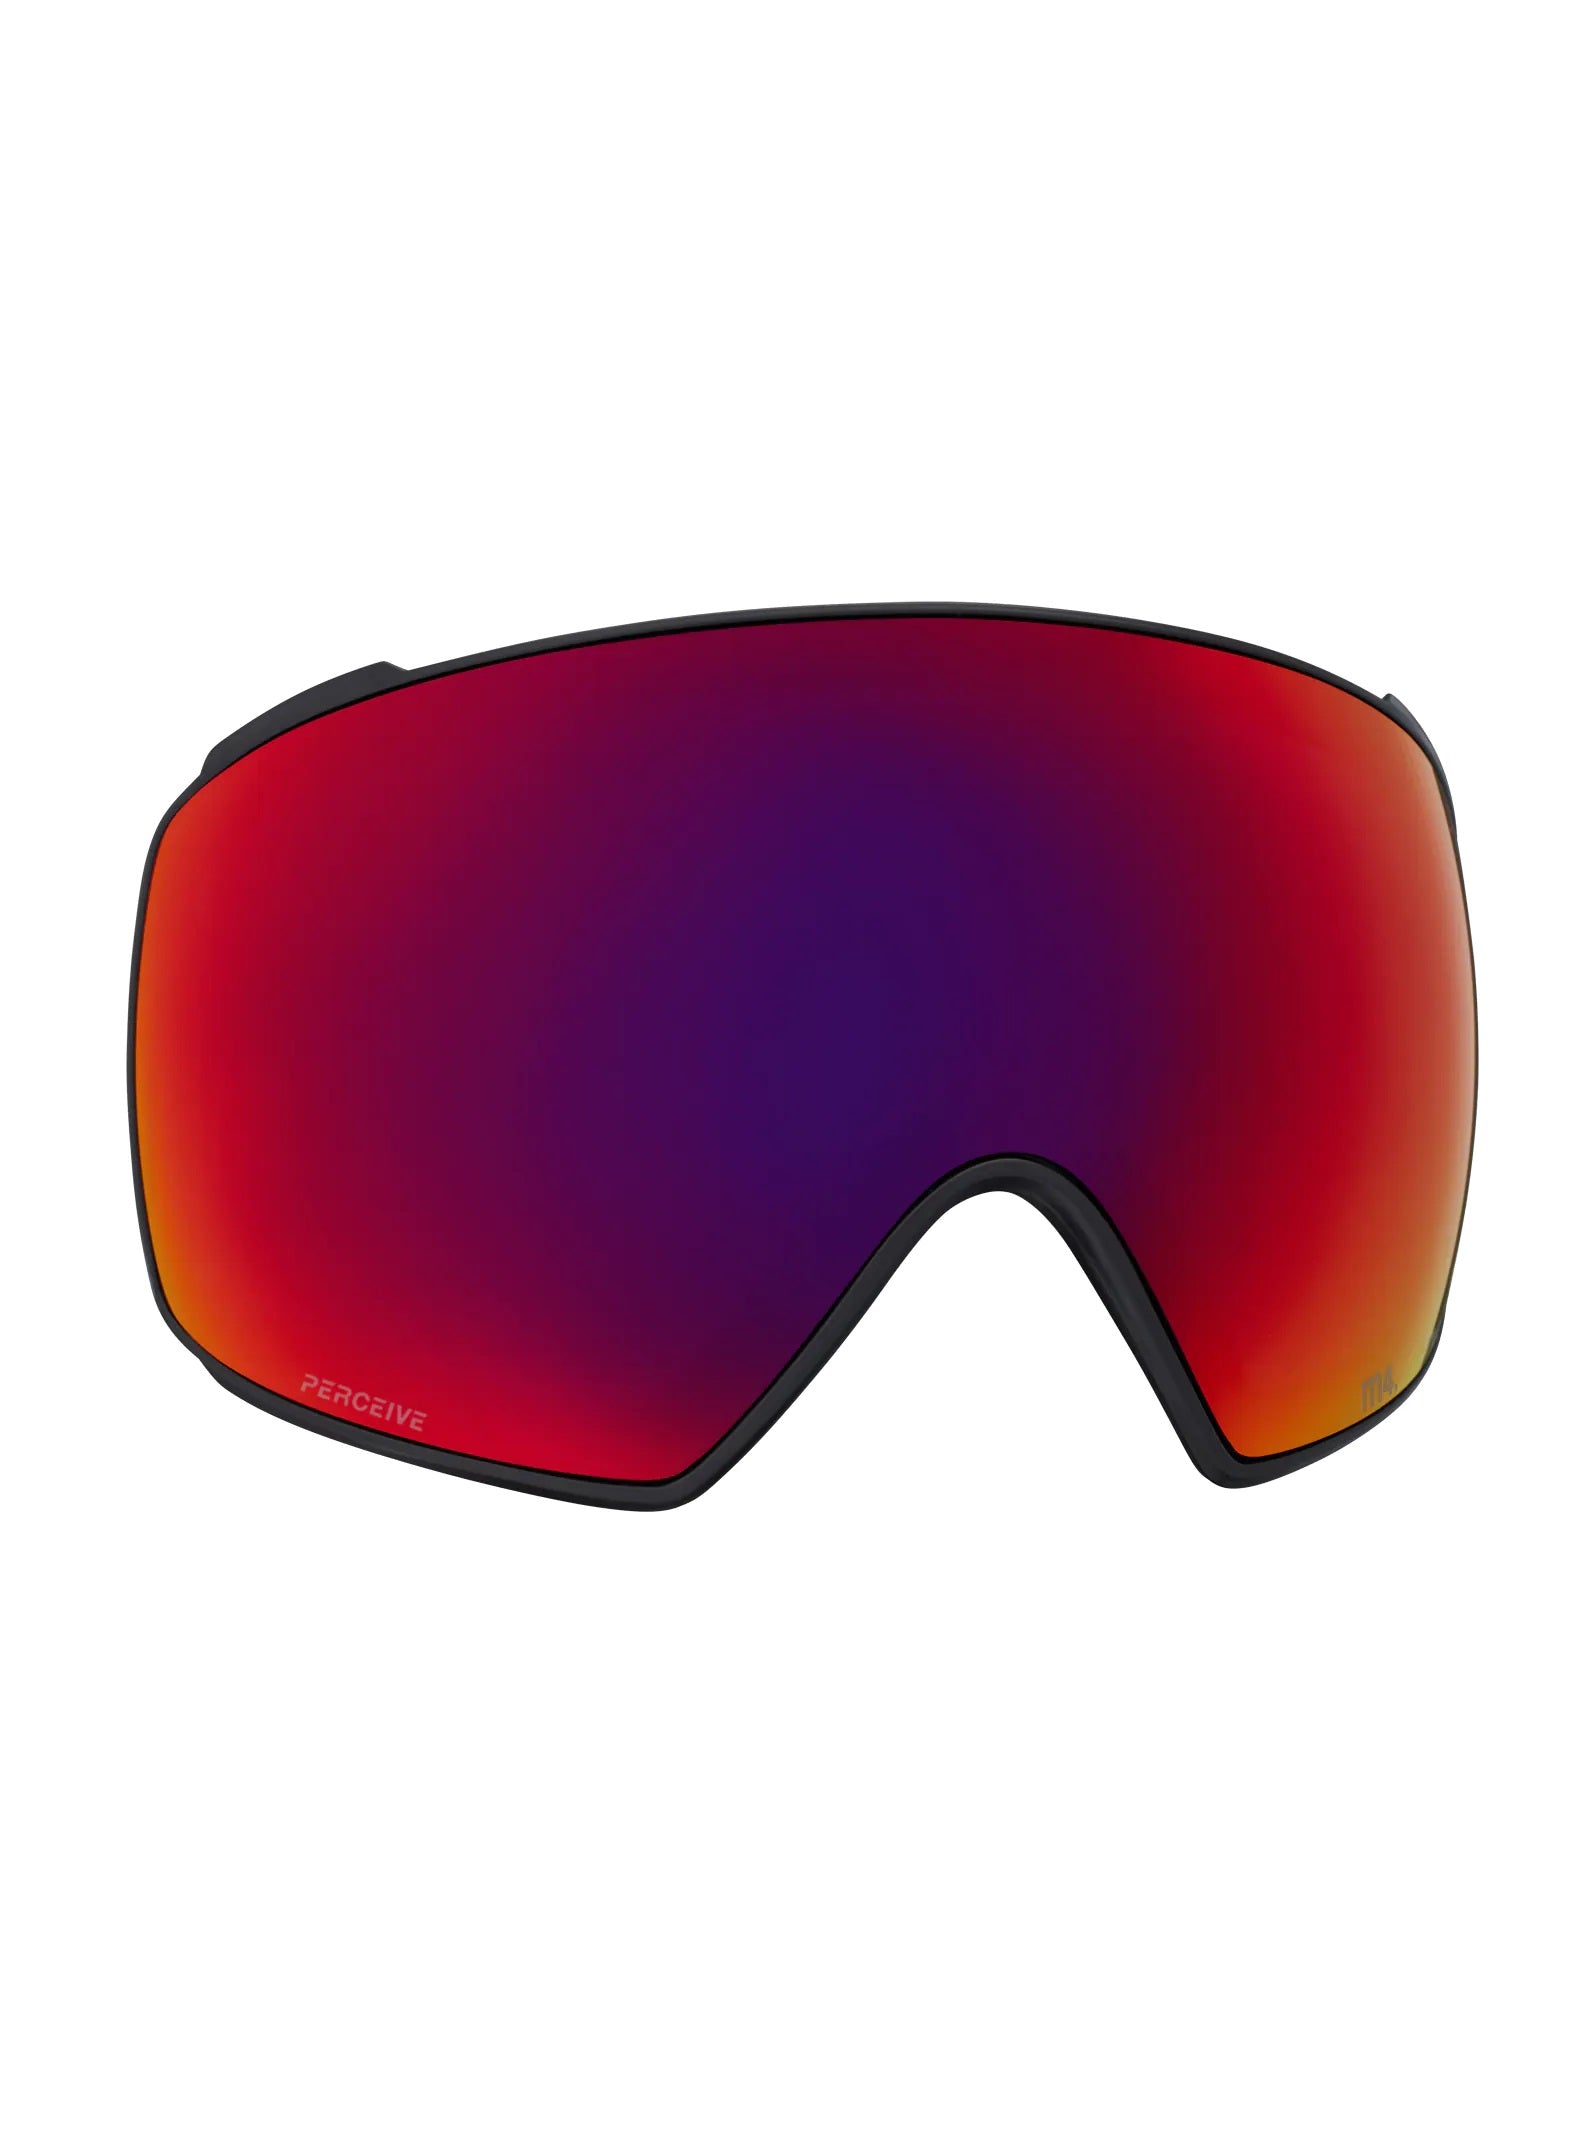 Anon M4 Toric Perceive Goggle Lens Sunny Red